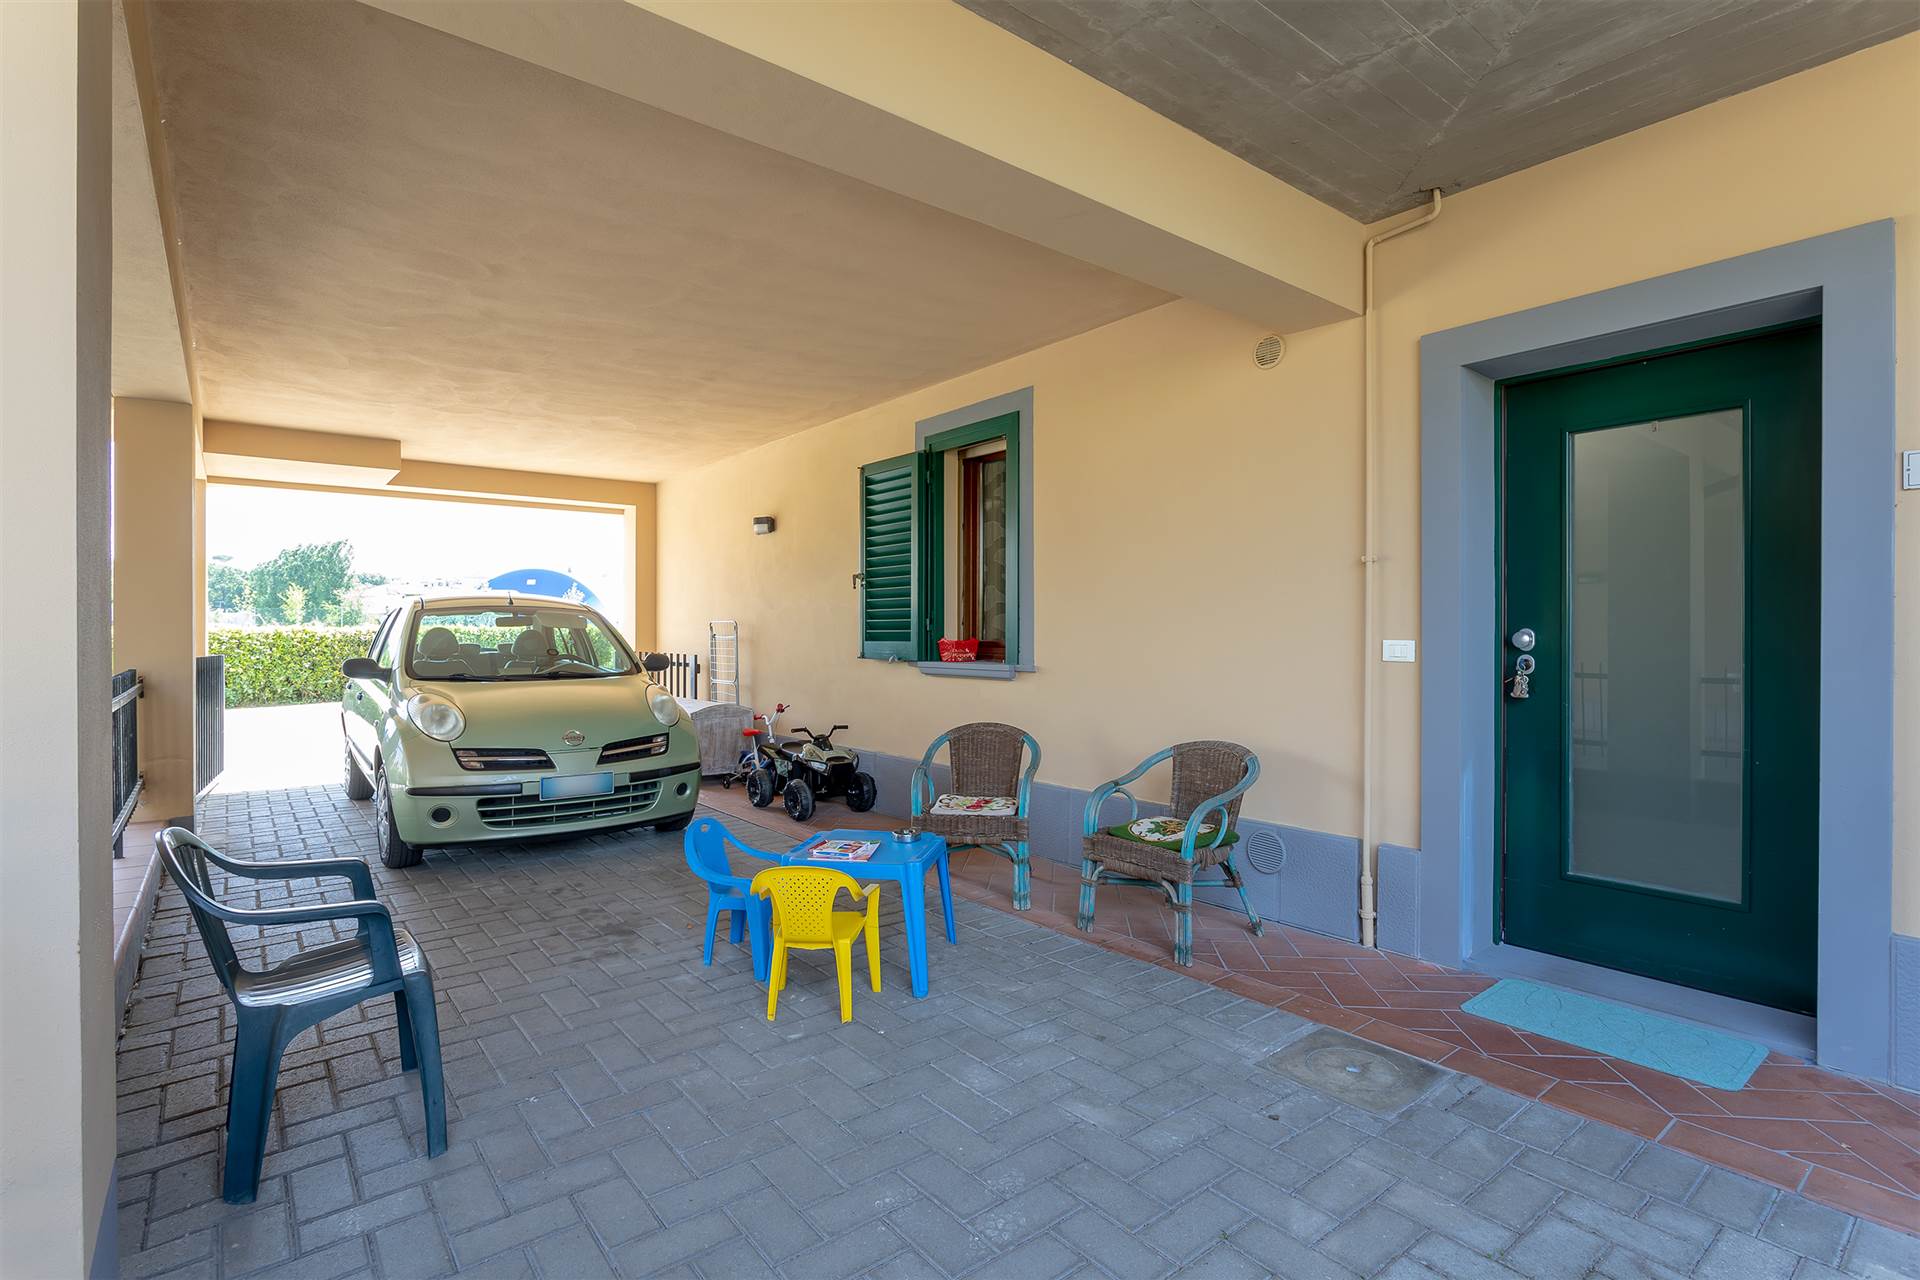 GRANAIO, POGGIO A CAIANO, Apartment for sale of 79 Sq. mt., Excellent Condition, Heating Individual heating system, Energetic class: G, placed at 